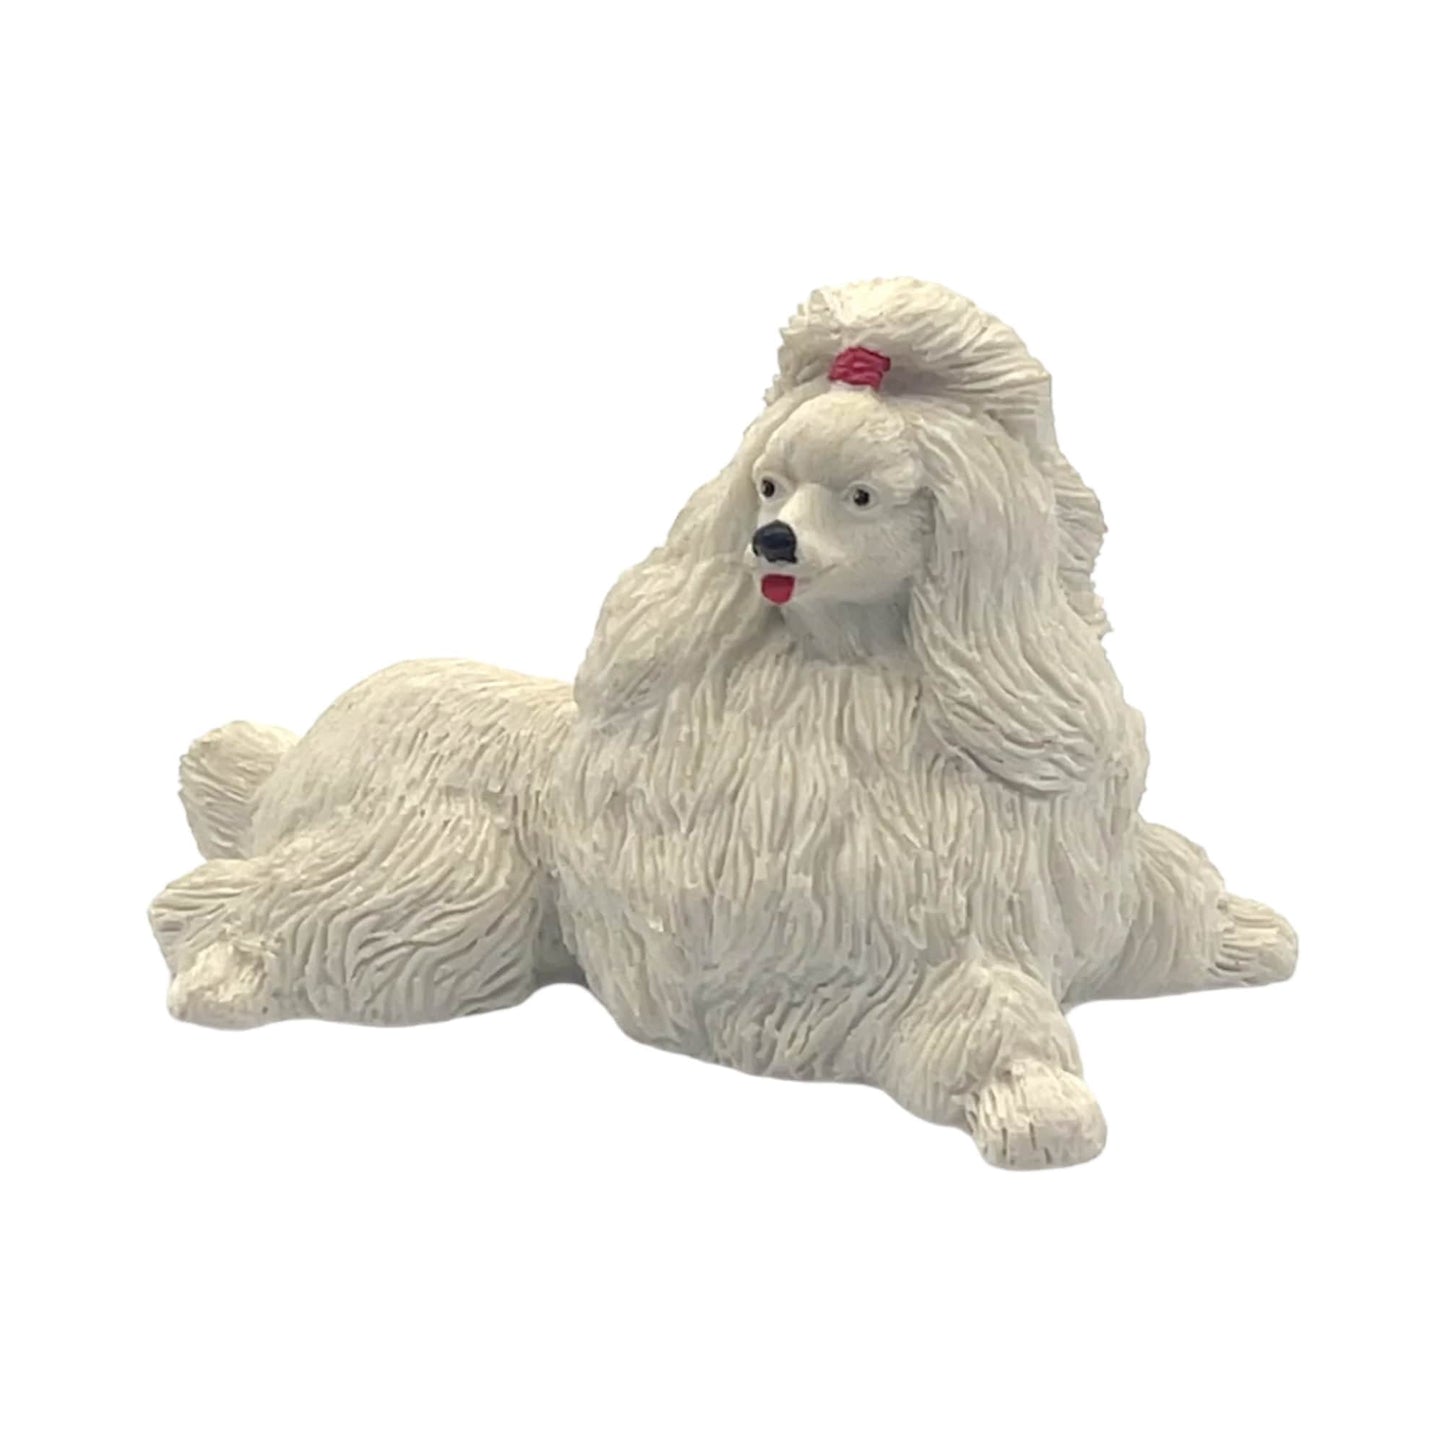 Sandicast  - Poodle  - With Bow - 3" x 4"